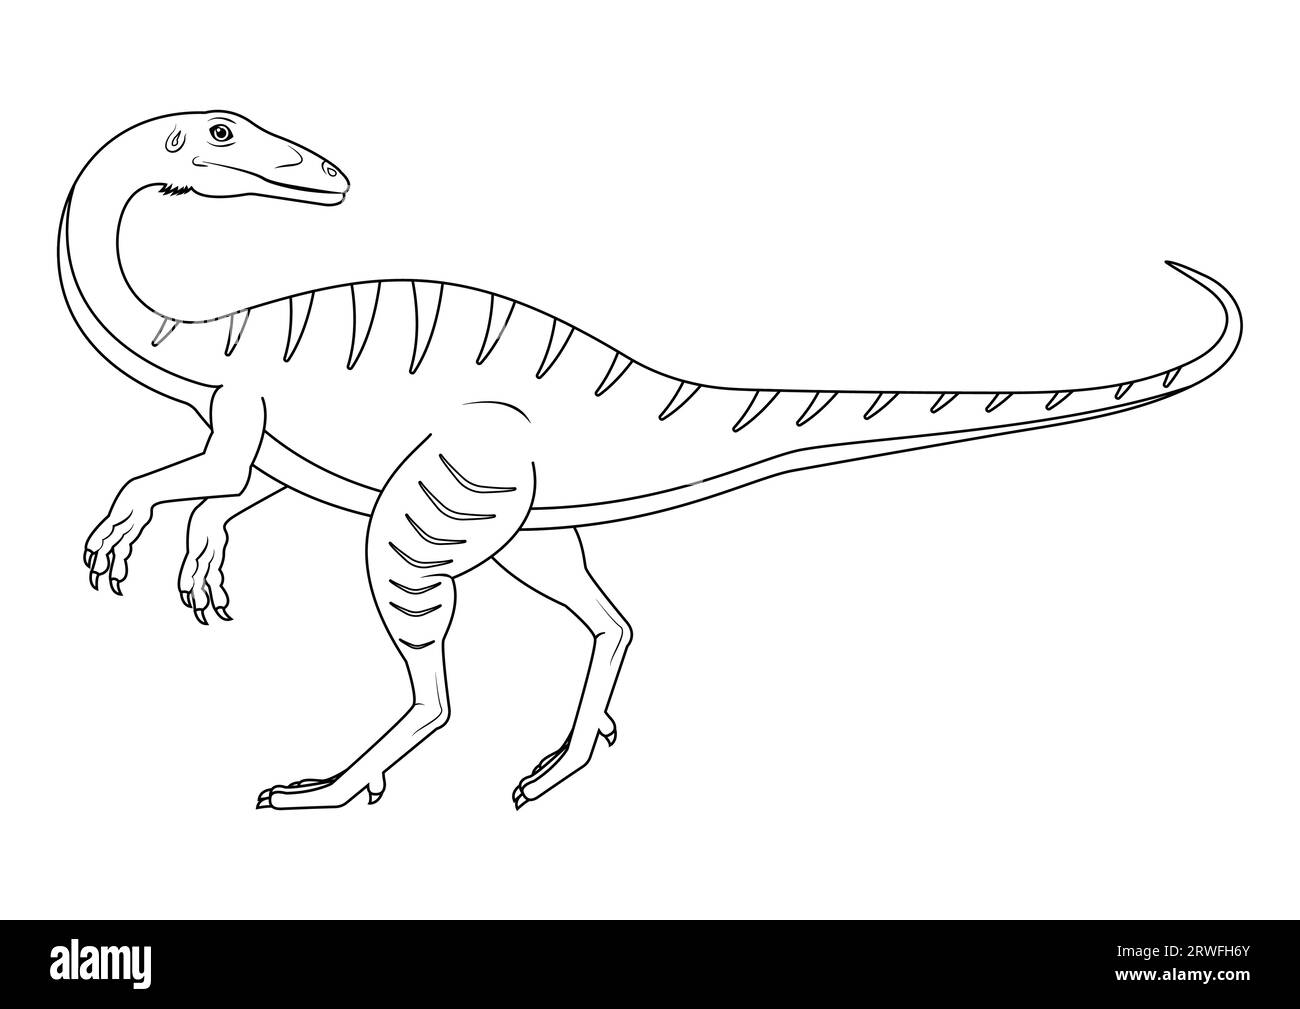 Black and White Coelophysis Dinosaur Cartoon Character Vector. Coloring Page of a Coelophysis Dinosaur Stock Vector